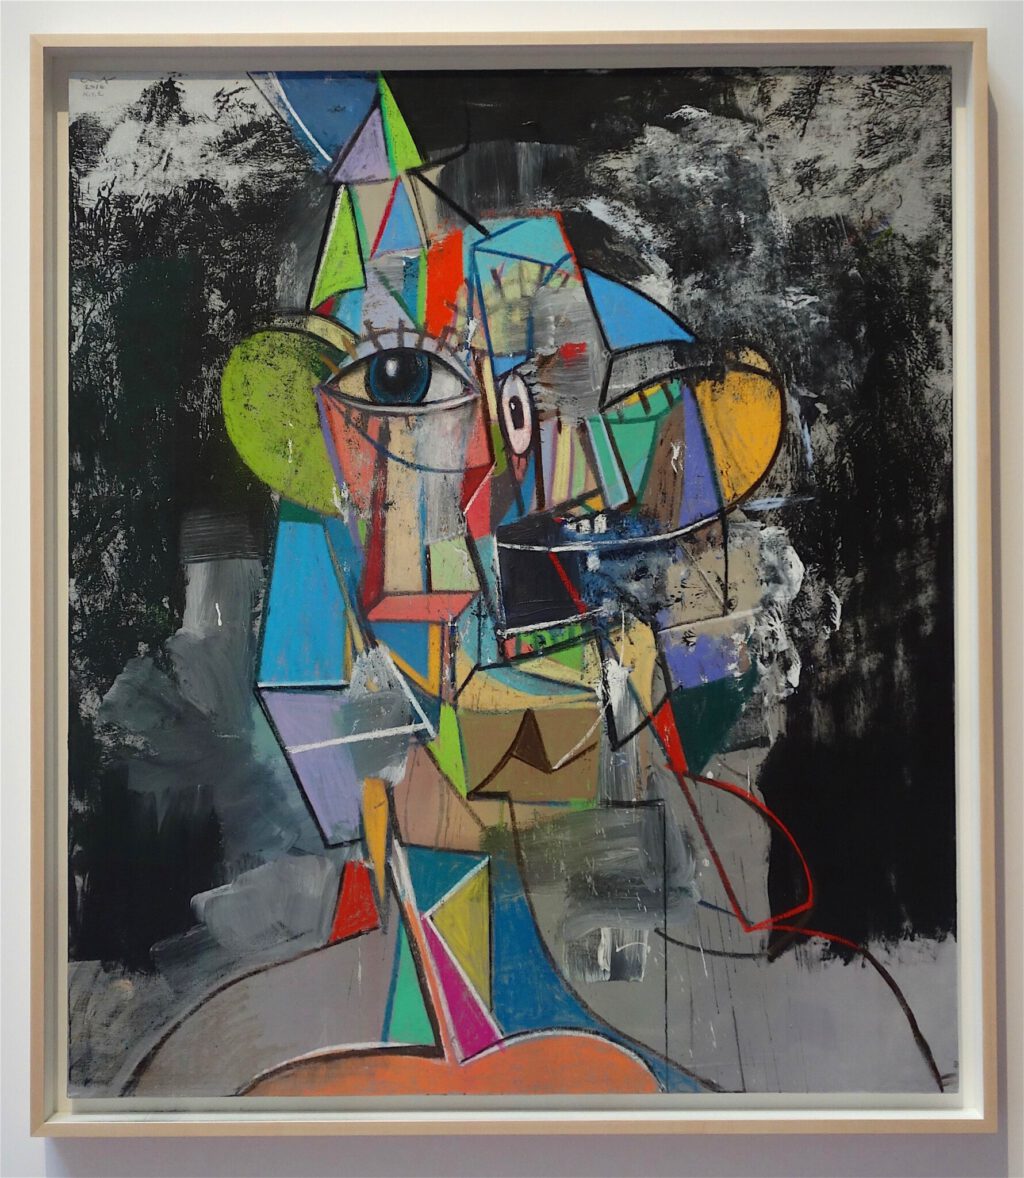 George Condo ジョージ・コンド ”Untitled” 2016, Acrylic, metallic, paint, charcoal and pastel on linen, 167.6 x 144.8 cm